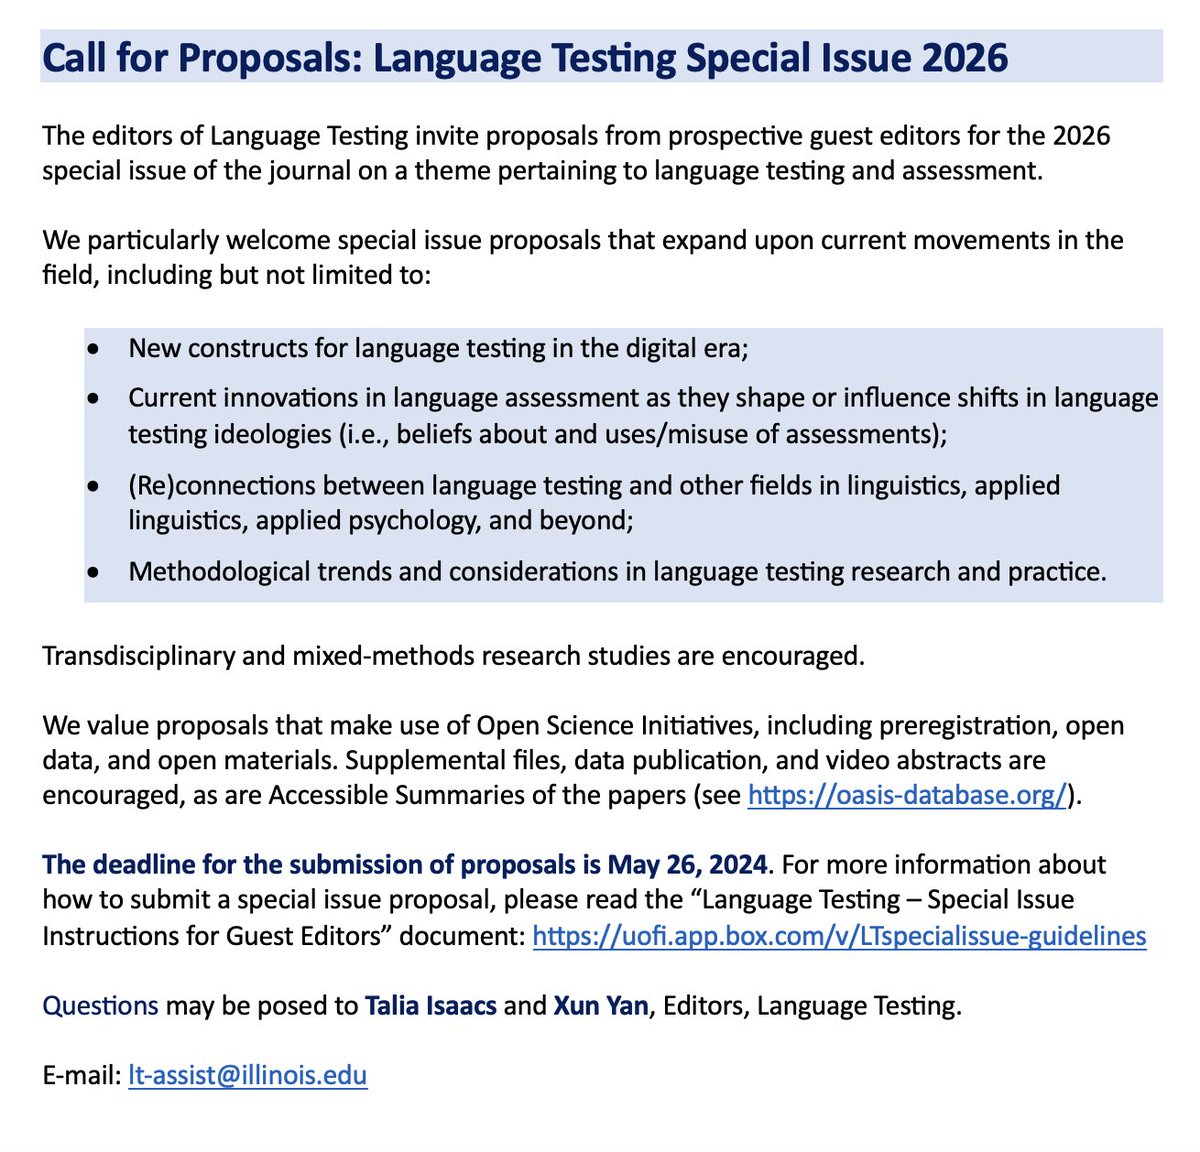 Call for Language Testing Special Issue 2026 proposals is now open! Submission deadline: May 26, 2024. For information about how to submit a proposal, please read the “Language Testing – Special Issue Instructions for Guest Editors” document: uofi.app.box.com/v/LTspecialiss…